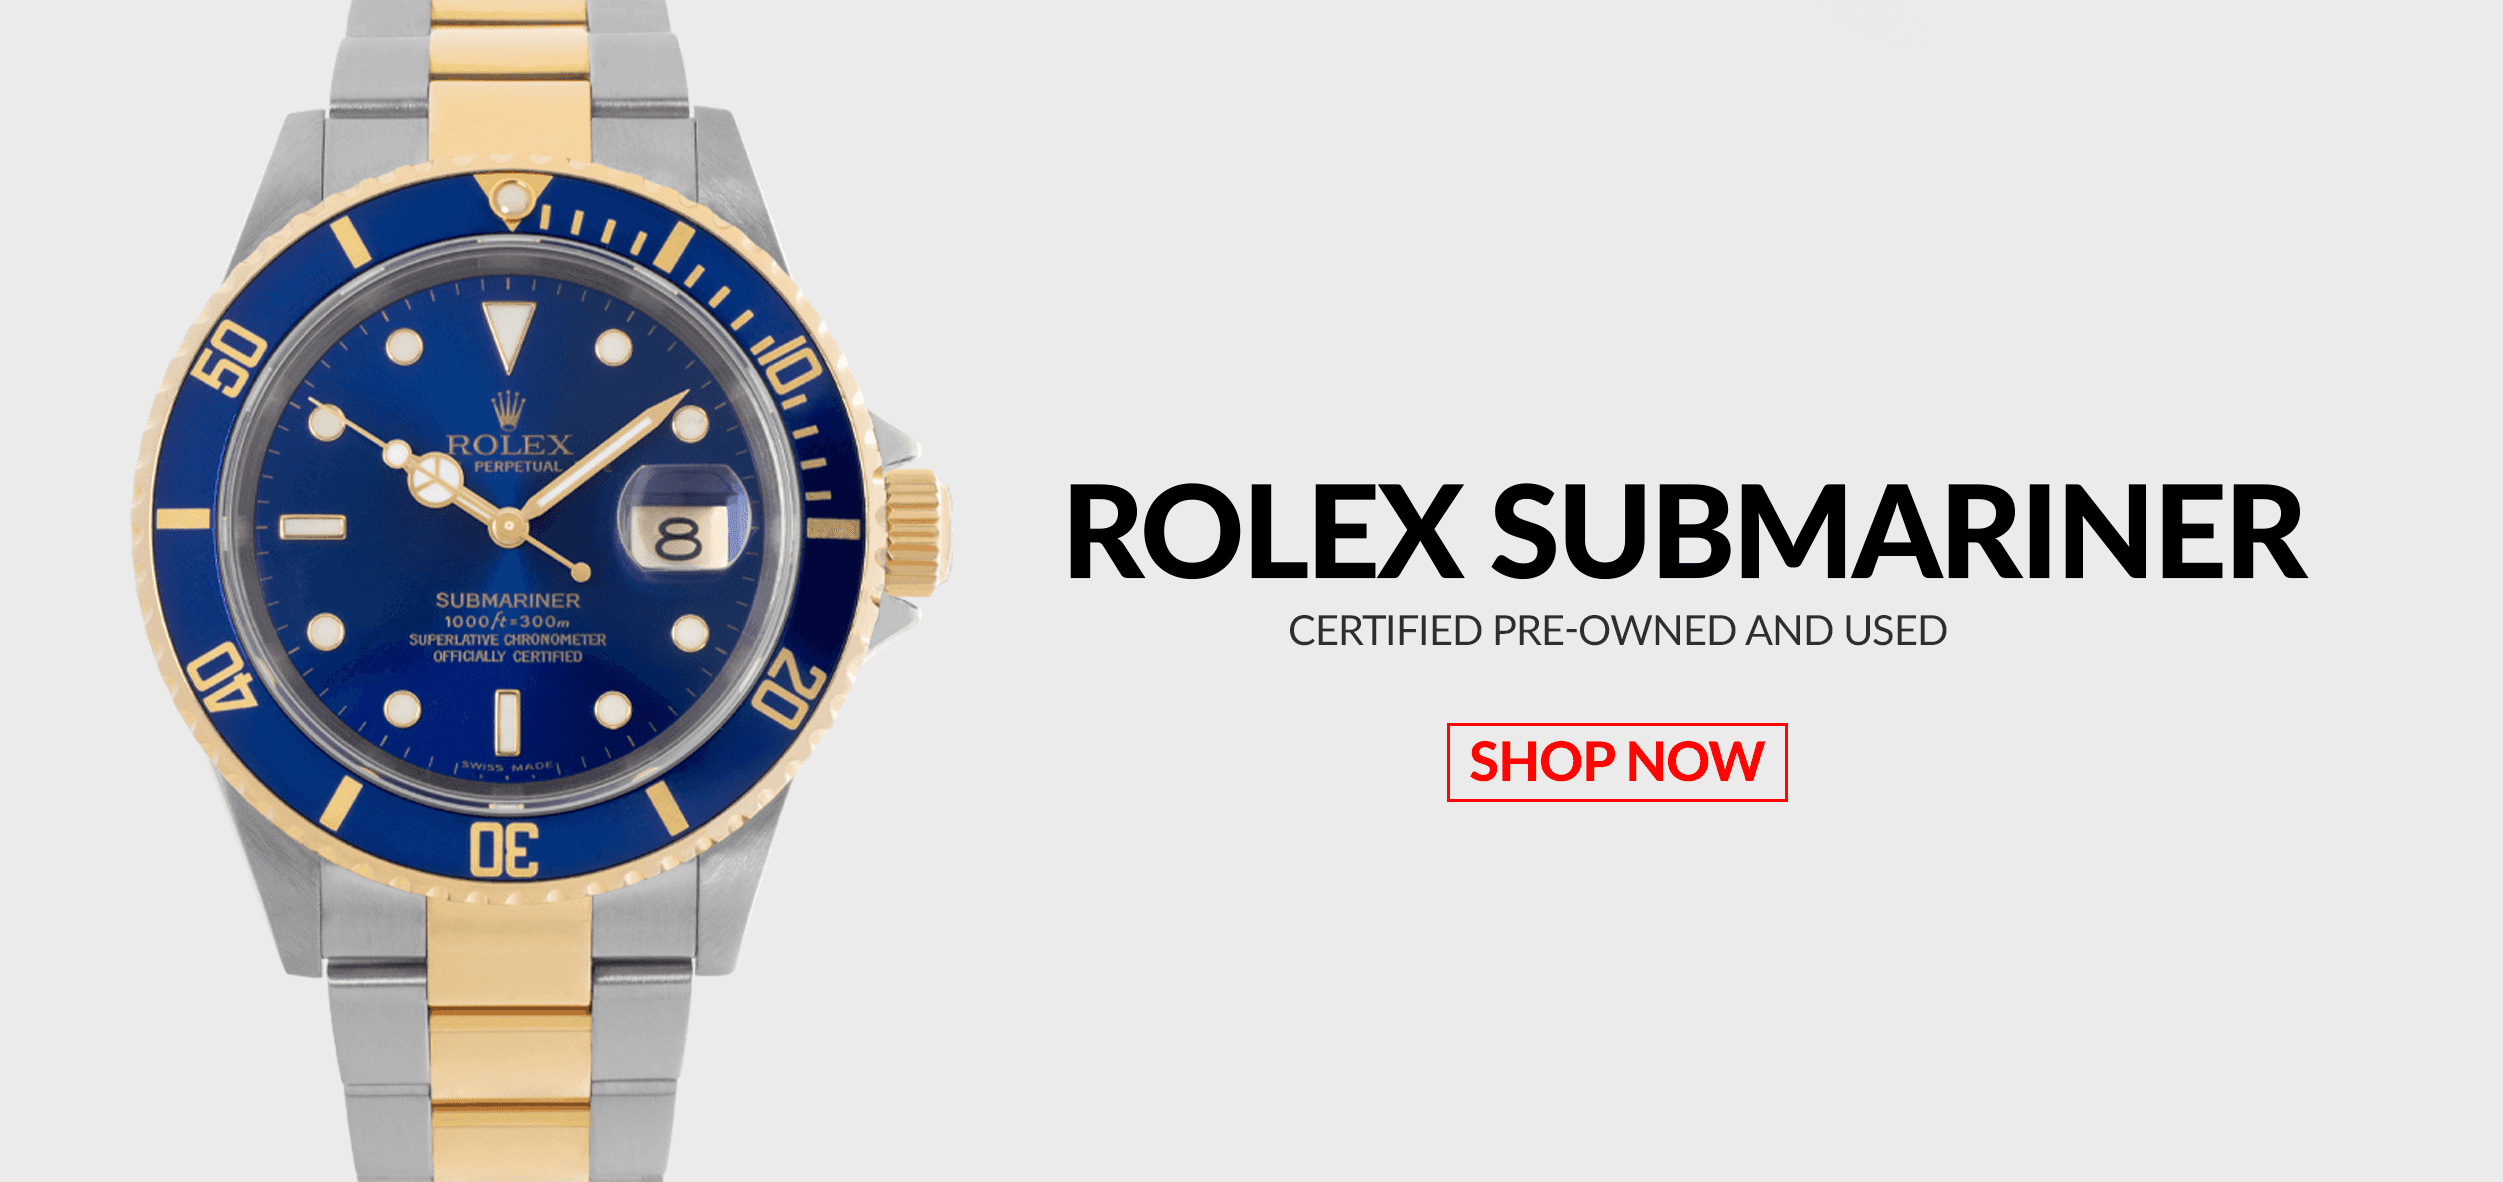 Pre-Owned Certified Used Rolex Submariner Watches Header